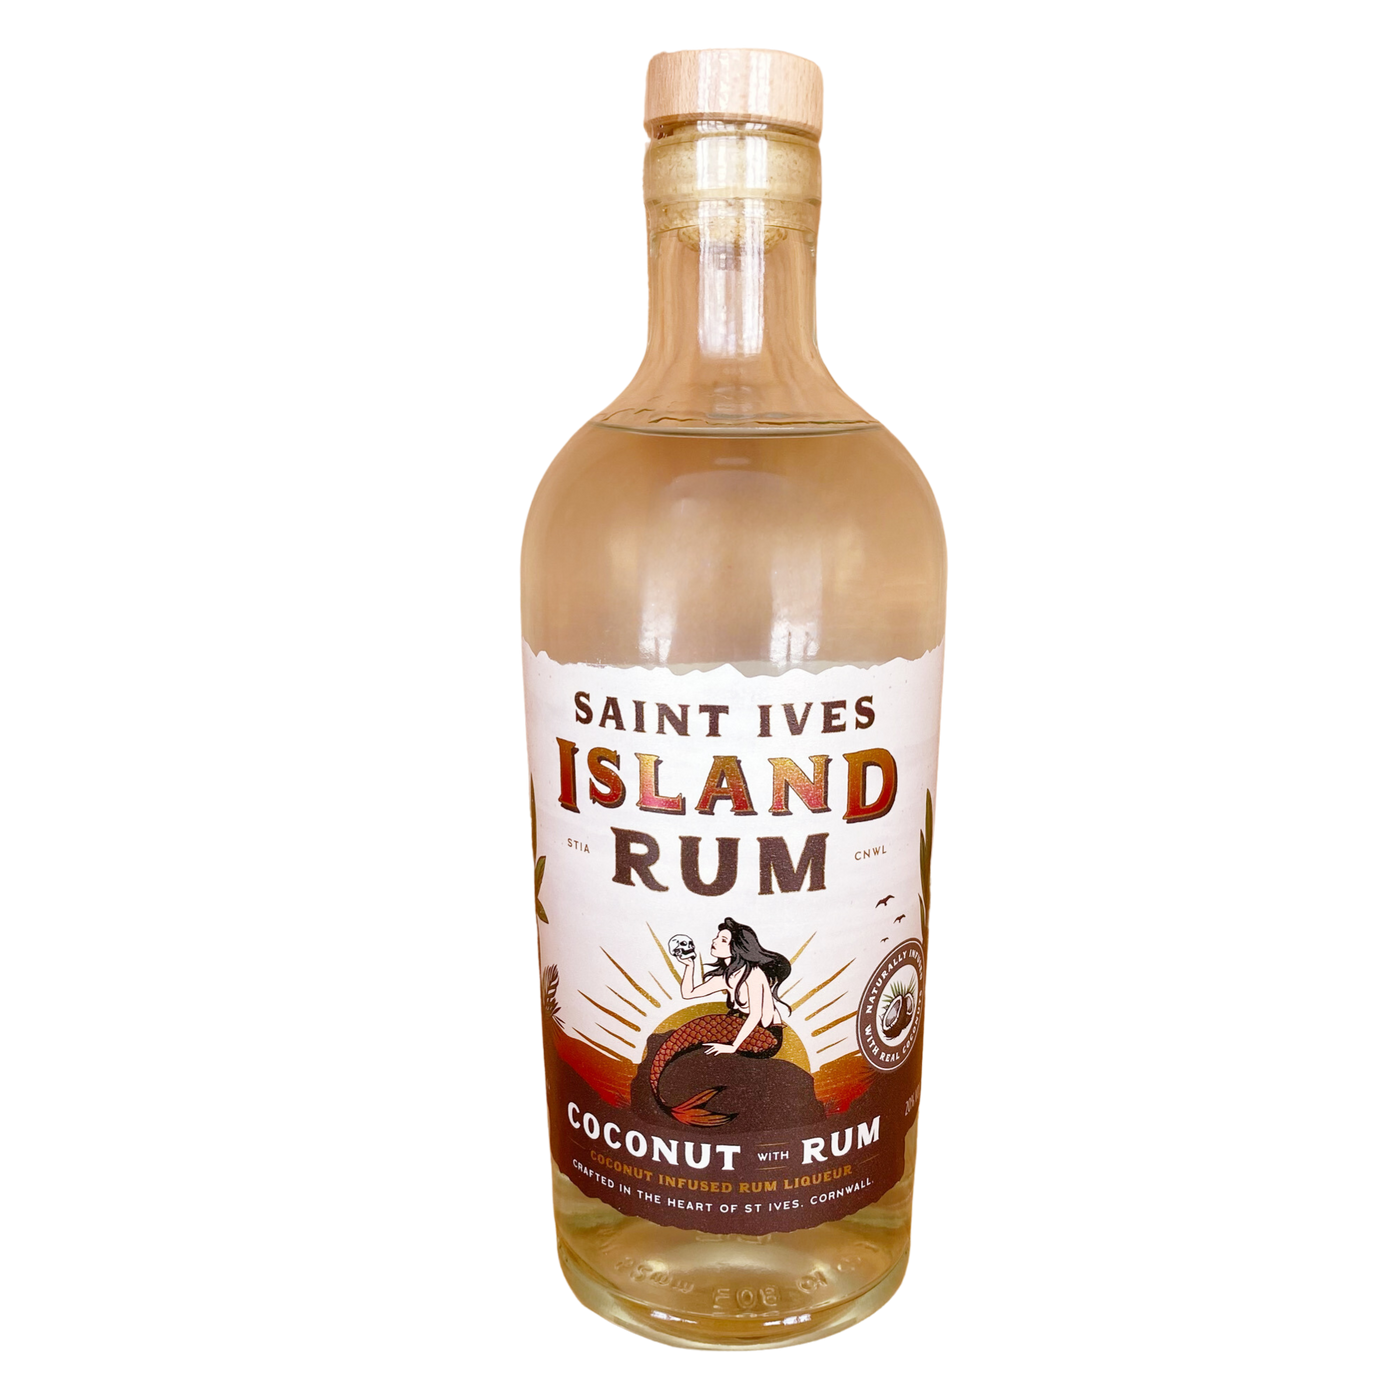 Saint Ives Island Rum with Coconut